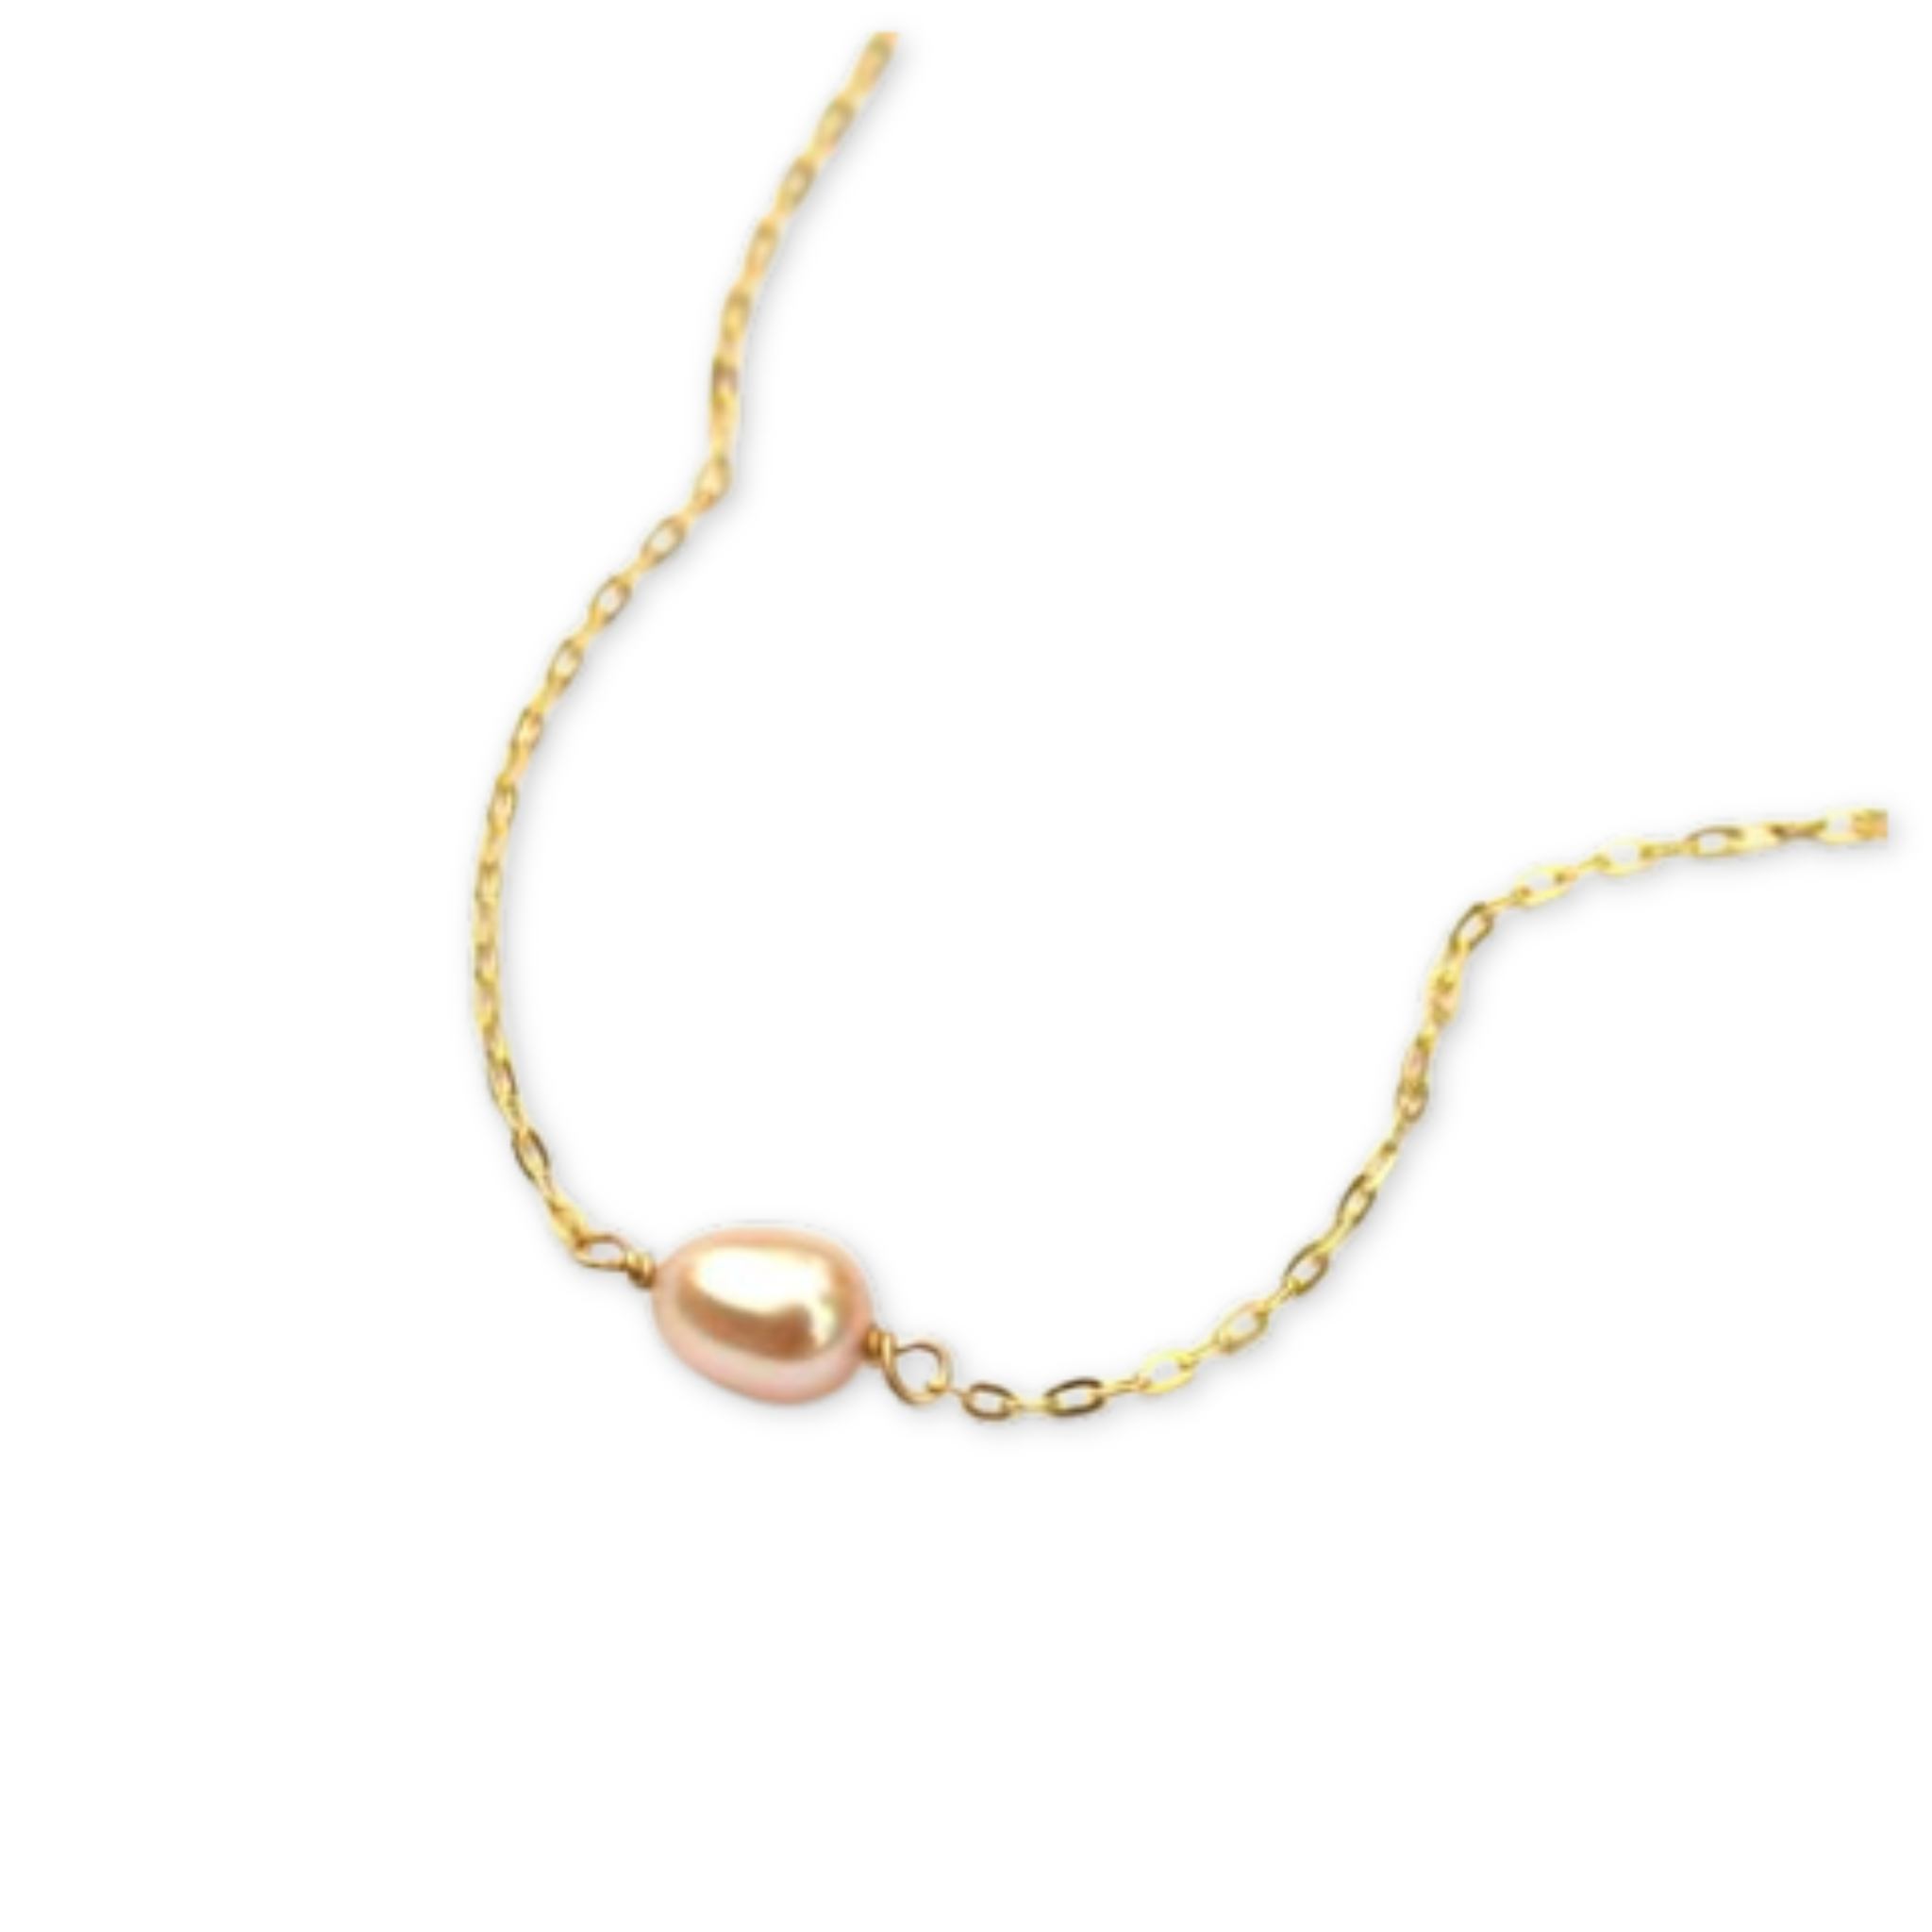 single large freshwater pearl on a delicate chain necklace